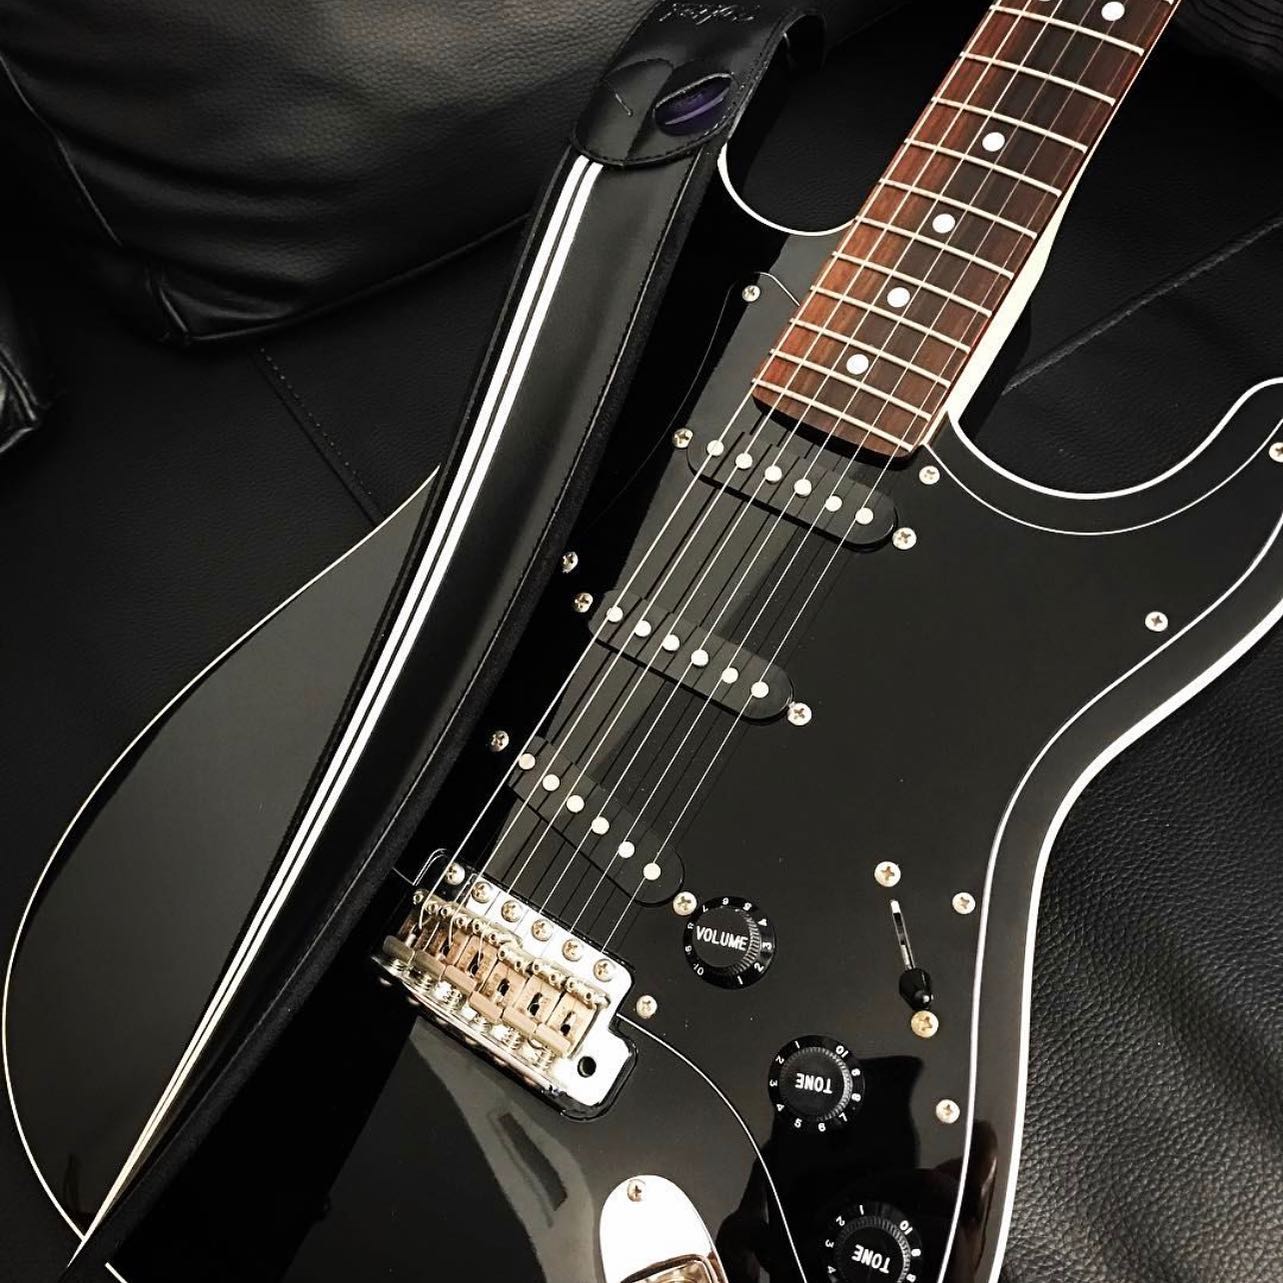 Race Black guitar and bass strap Righton